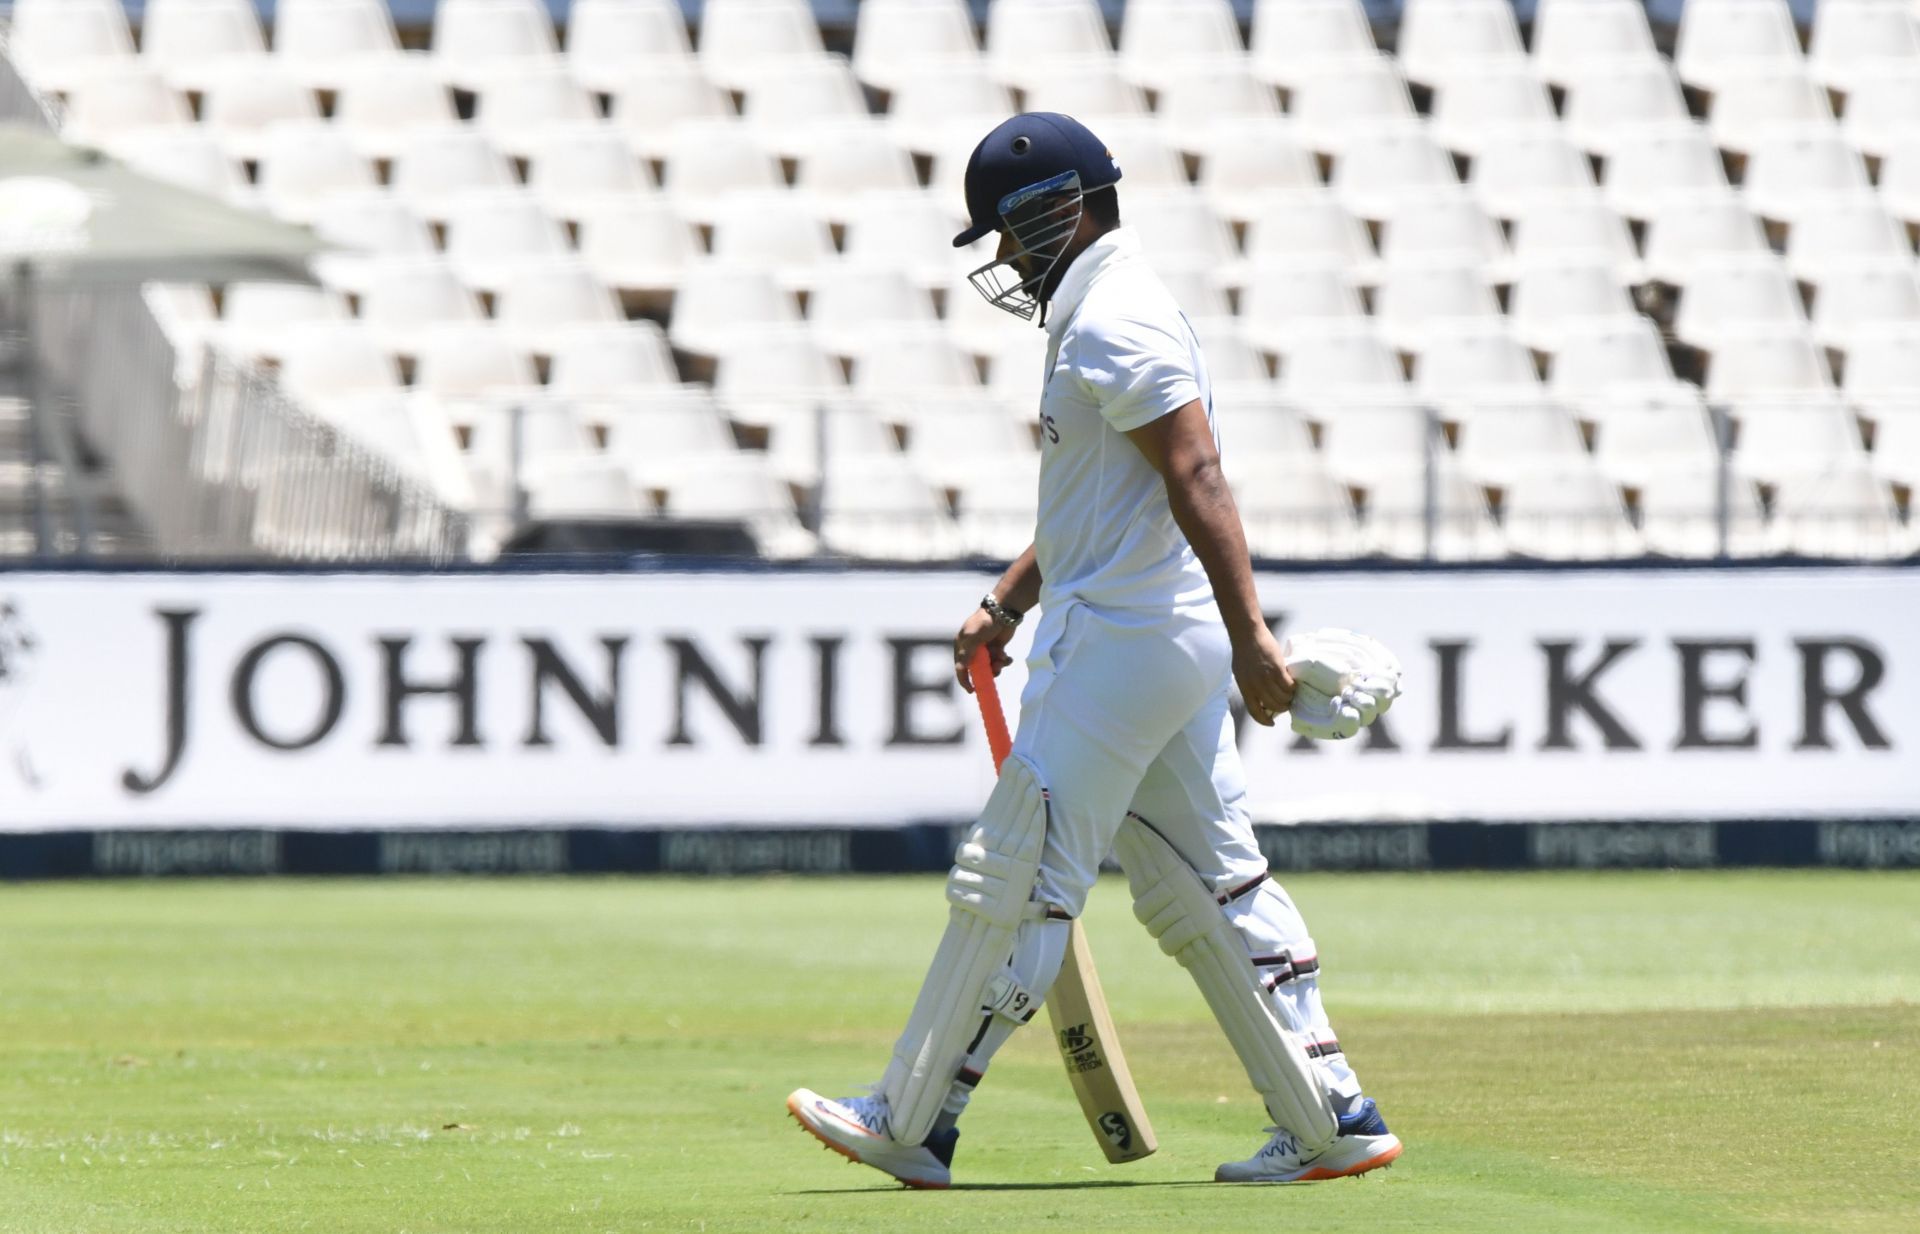 Rishabh Pant has received a lot of flak for throwing away his wicket in the Johannesburg Test